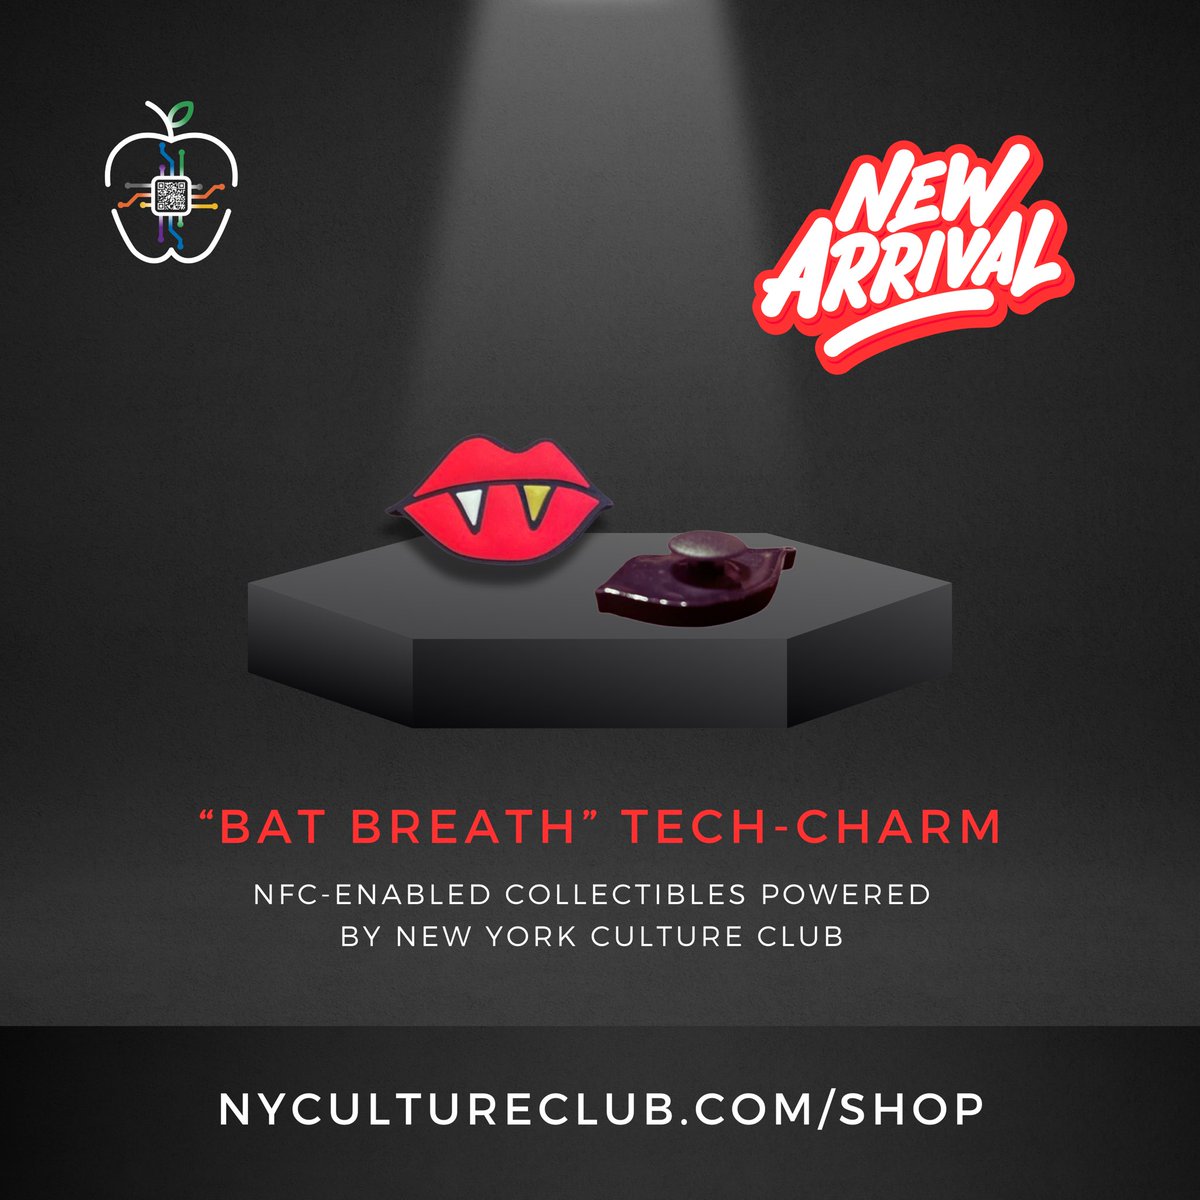 GM! Introducing the NYCC tech-charms. 

Head on over to NYCultureclub.com/shop to get your customizable 'Bat Breath' charm. These charms seamless 'dock' onto @Crocs and other fashion & accessories, offering a fun and unique way to share your business card, socials etc.

#nfc